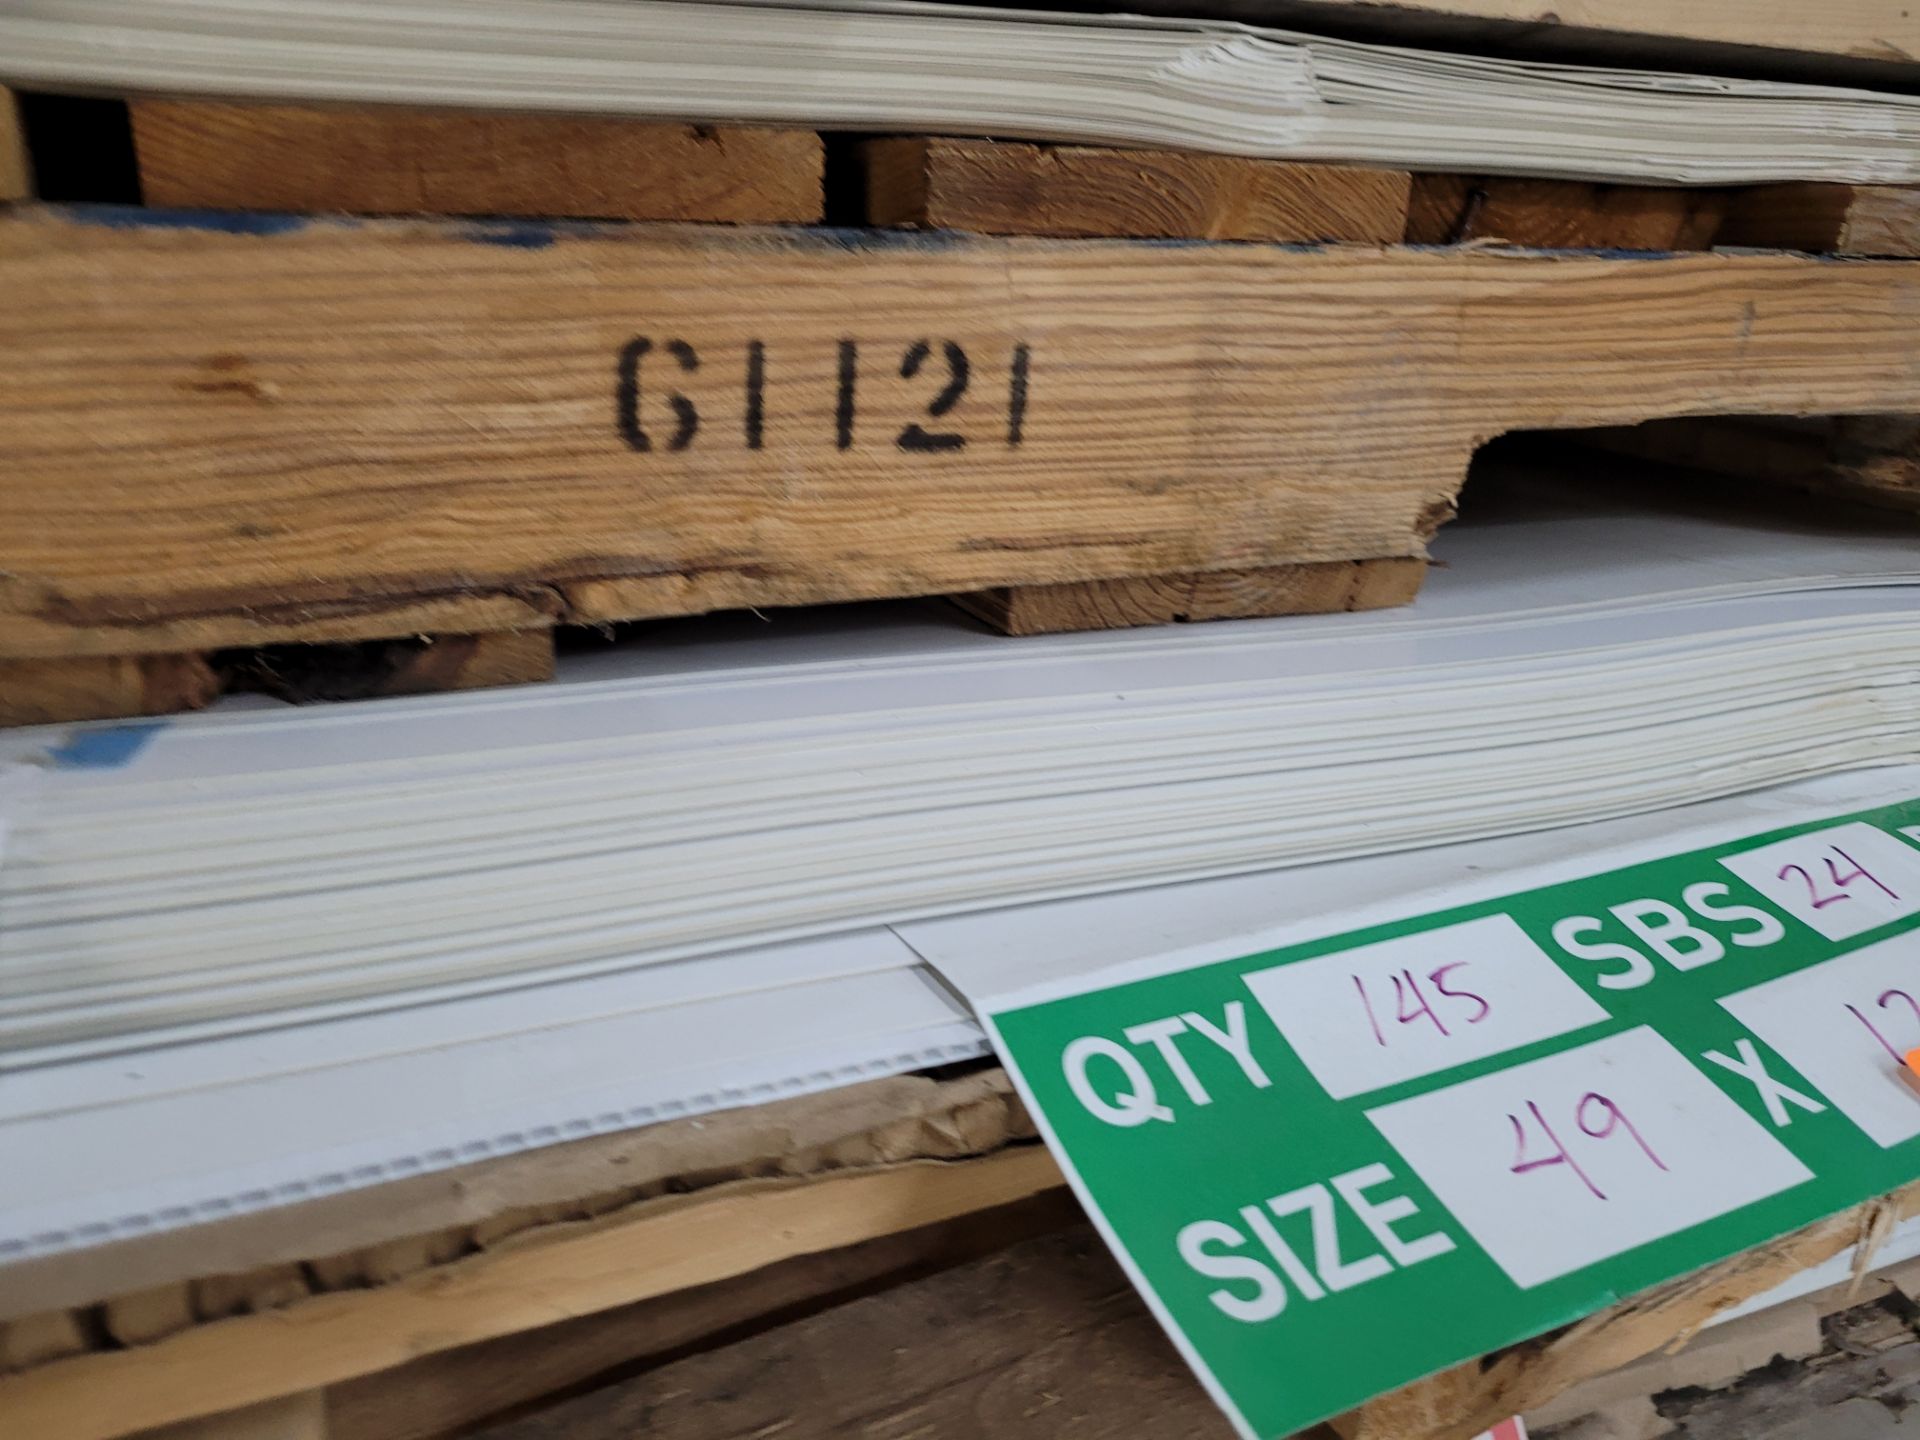 Lot of CARDSTOCK Sheets, 24pt, C2S, 49x120, orig. 145/ct, on pallet (uncounted, see photos) - Image 2 of 2